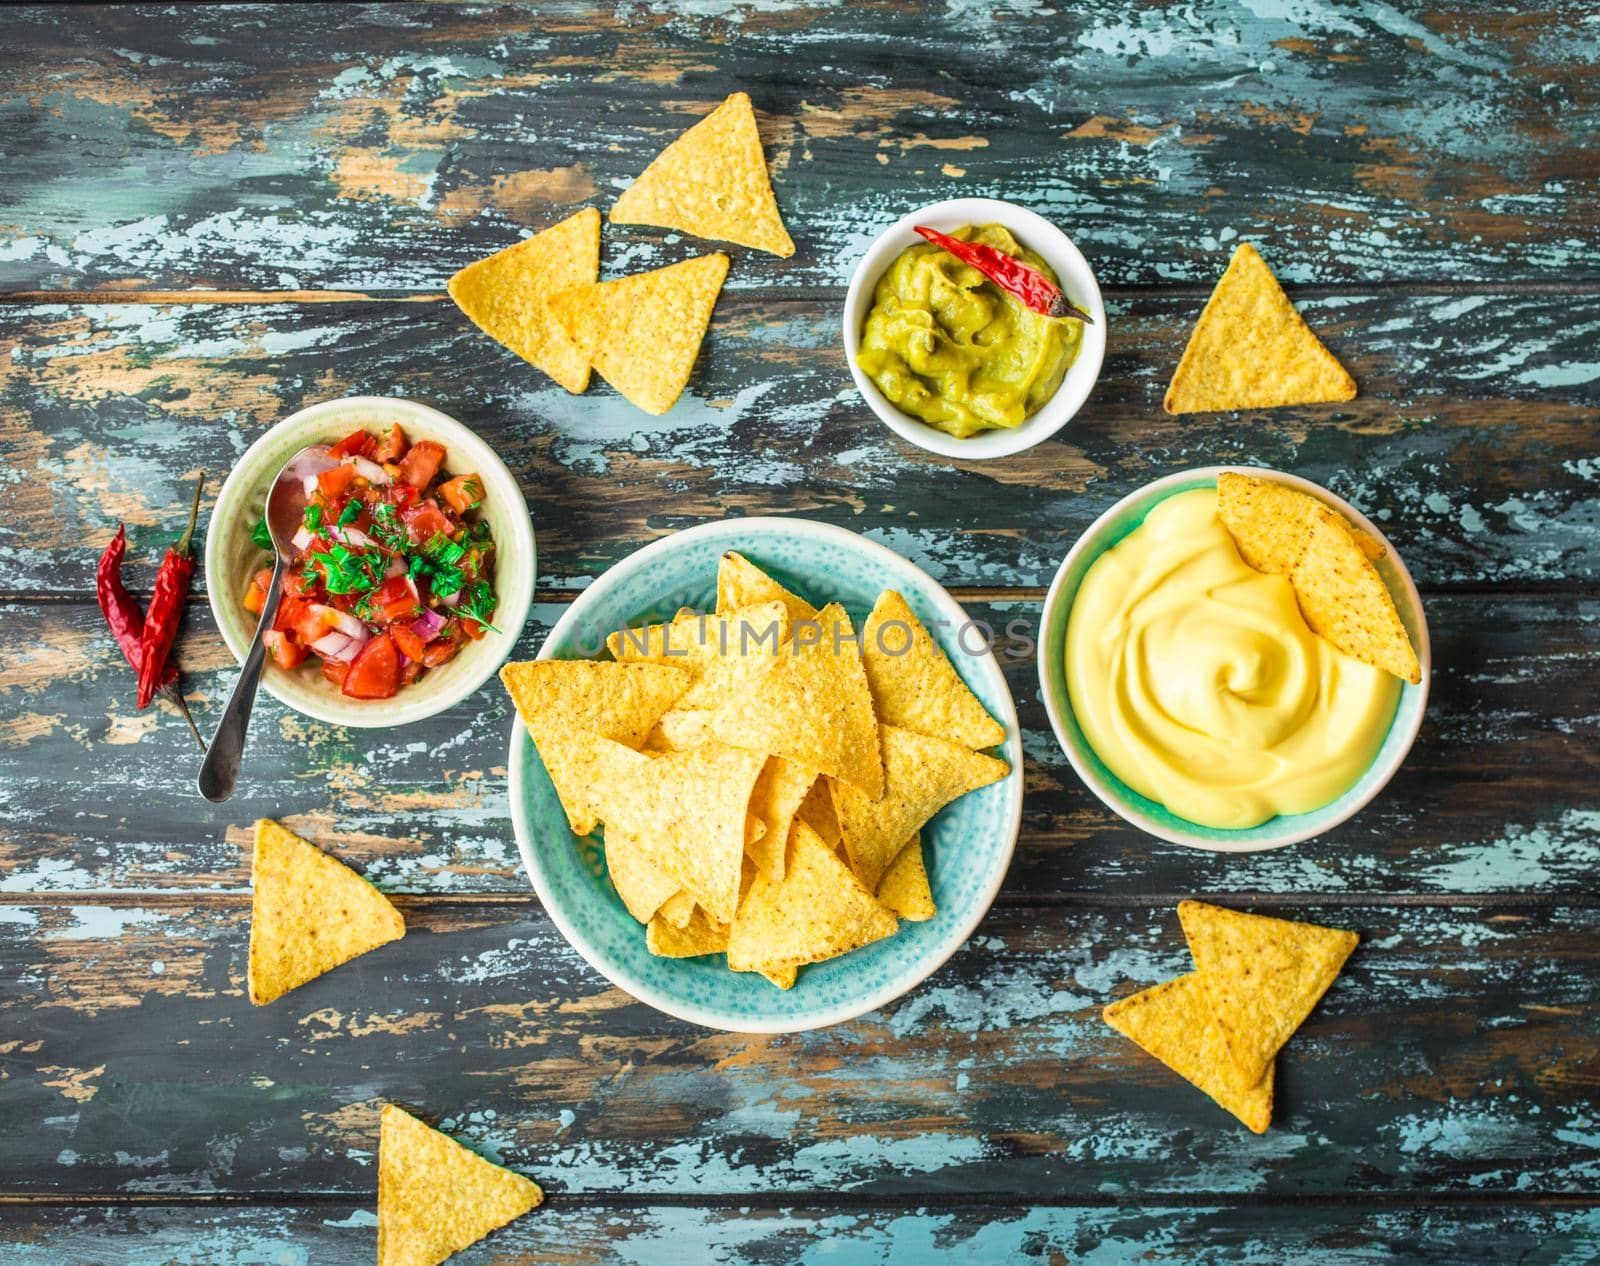 Mexican tortilla chips with guacamole, cheese, salsa dips. Nachos and assorted dips. Mexican party food, appetizers. Top view. Tortilla chips, sauces, hot pepper, avocado, rustic wooden background